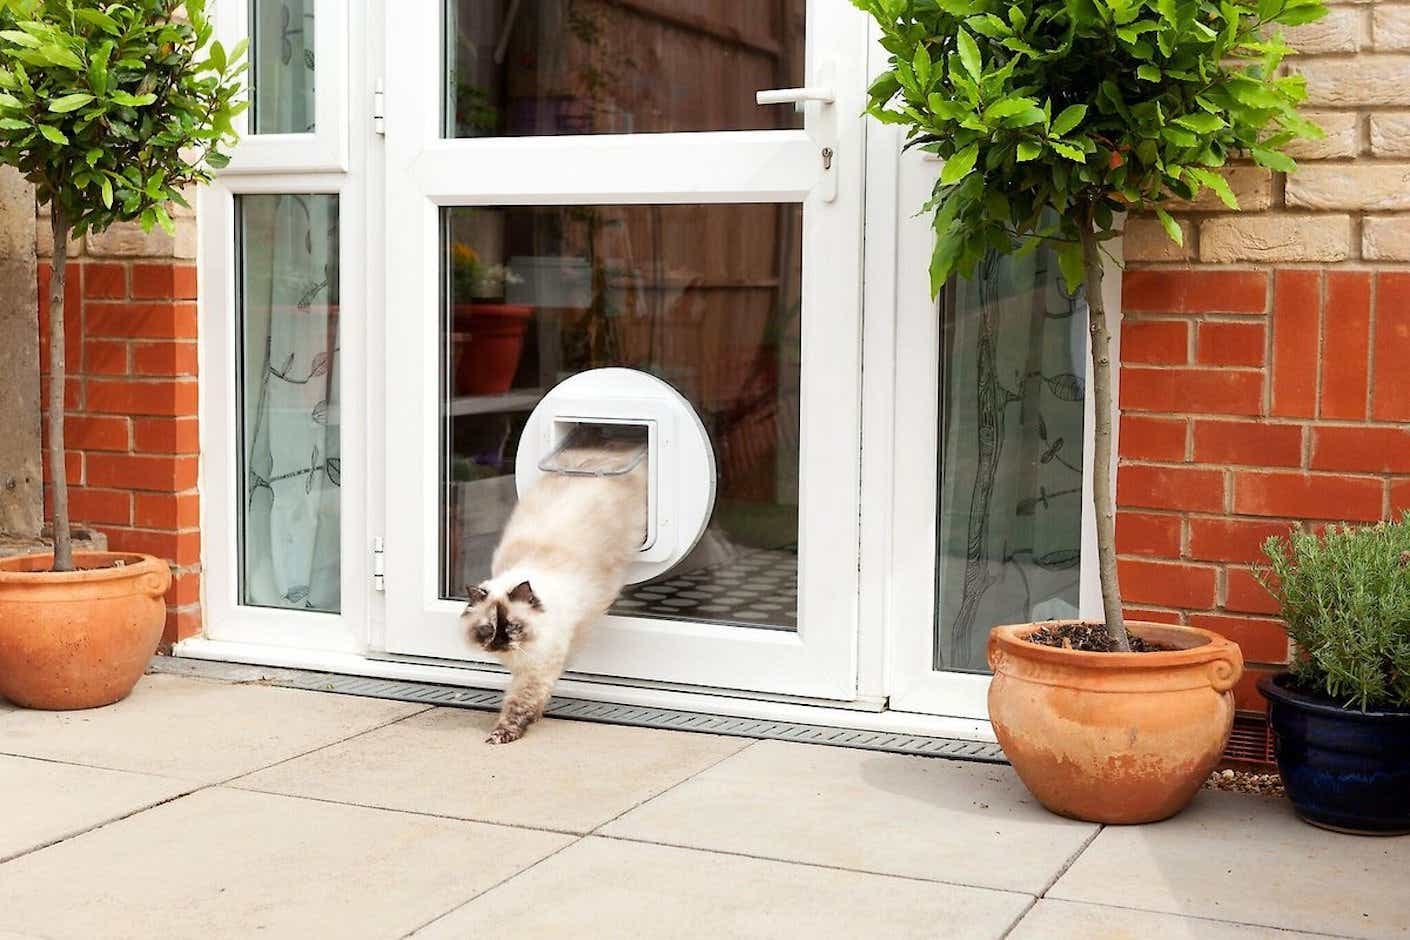 A fluffy cat emerges from an electronic smart pet door installed in a back door.